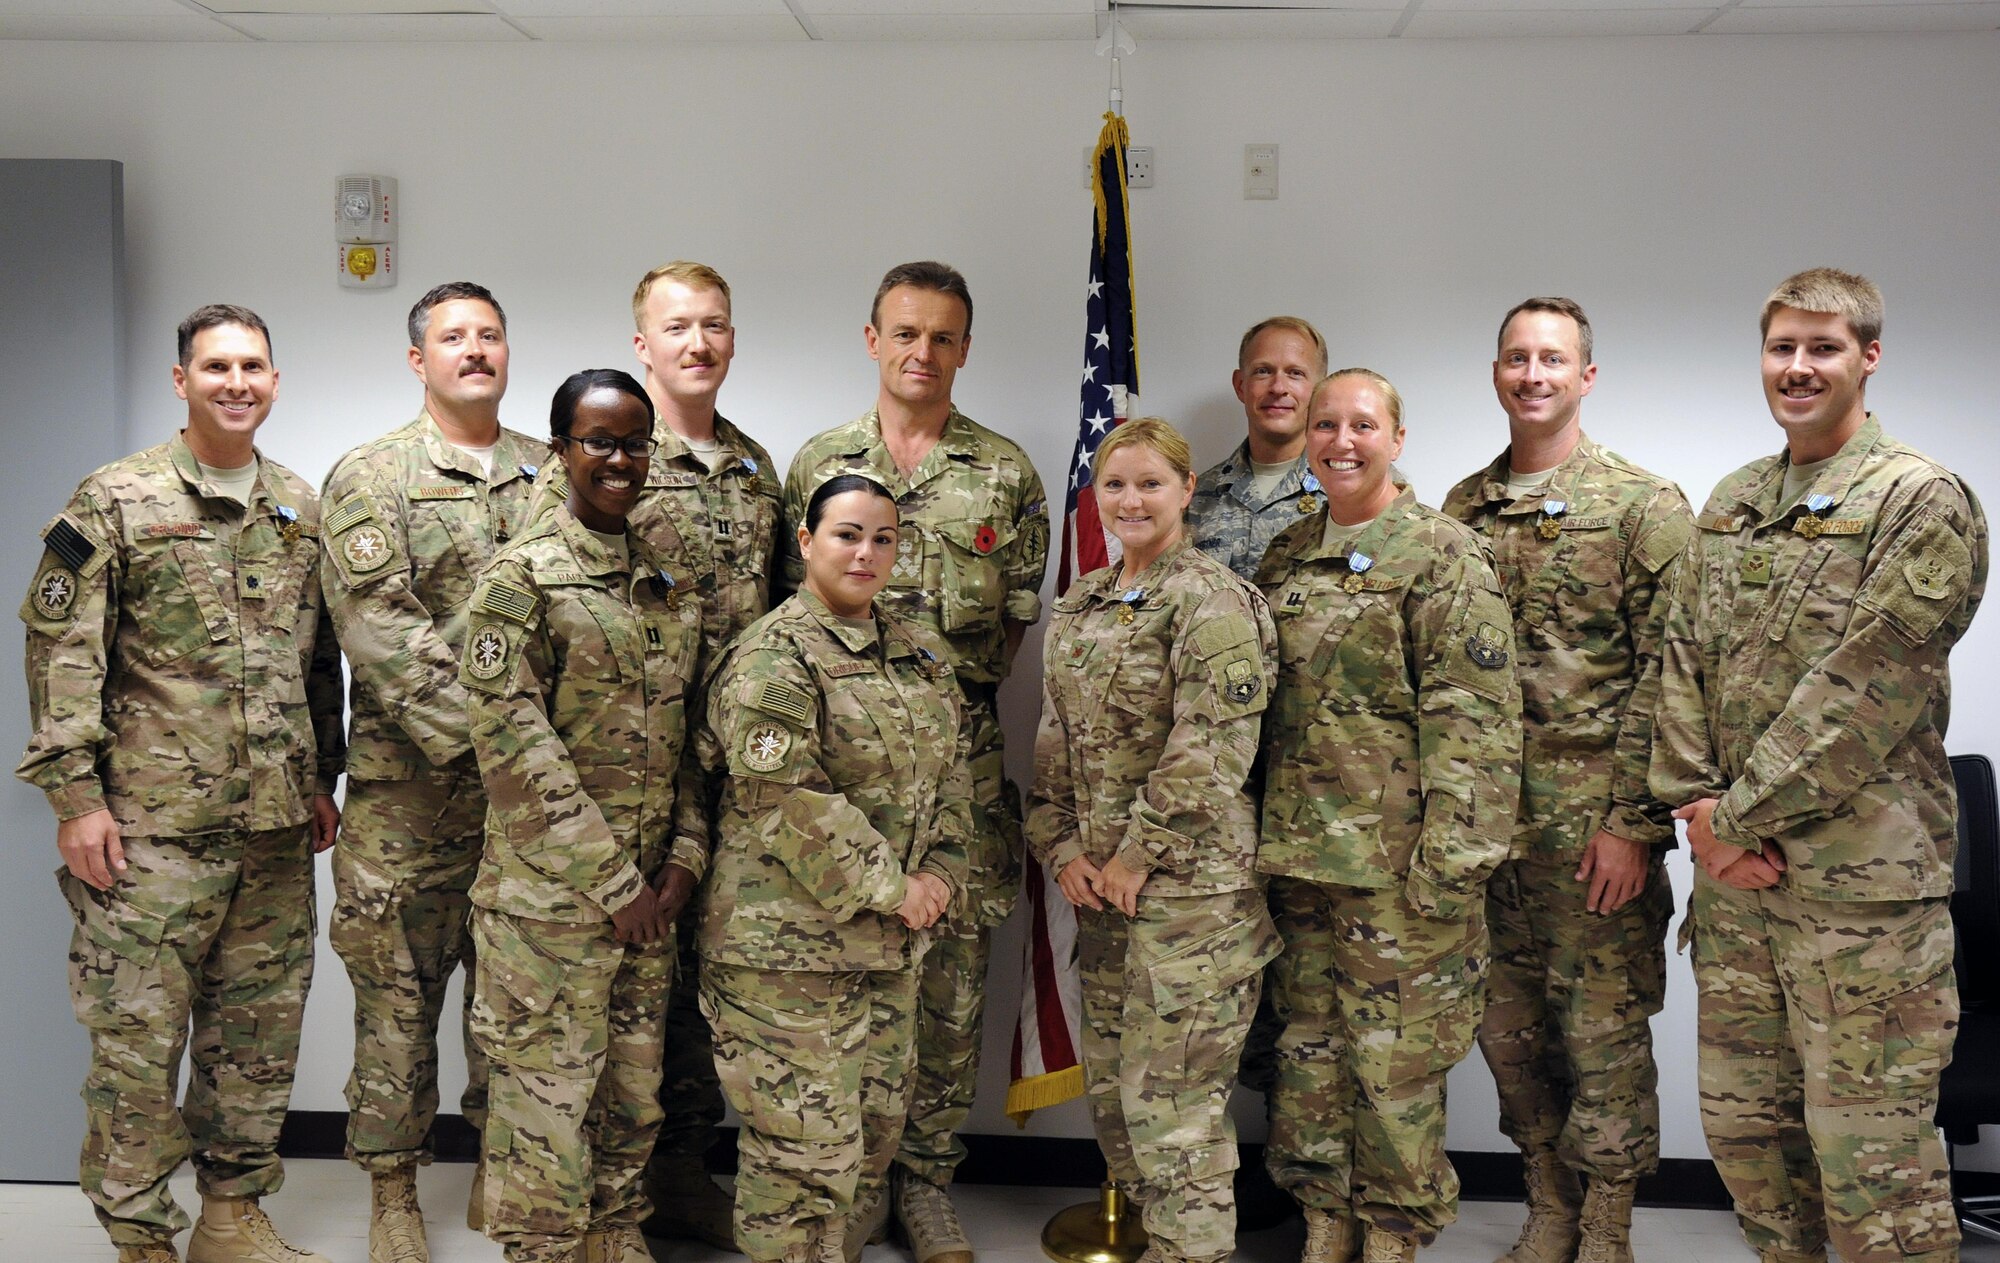 The mobile field surgical team assigned to the 379th Expeditionary Medical Operations Squadron pose for a group photo after being presented the Joint Service Achievement Medal Nov. 2, 2016, at Al Udeid Air Base, Qatar. These mobile field surgical team Airmen provided medical care for U.S. special operations forces supporting coalition forces and enhanced their unit’s ability to conduct operations in Syria. (U.S. Air Force photo by Senior Airman Cynthia A. Innocenti)